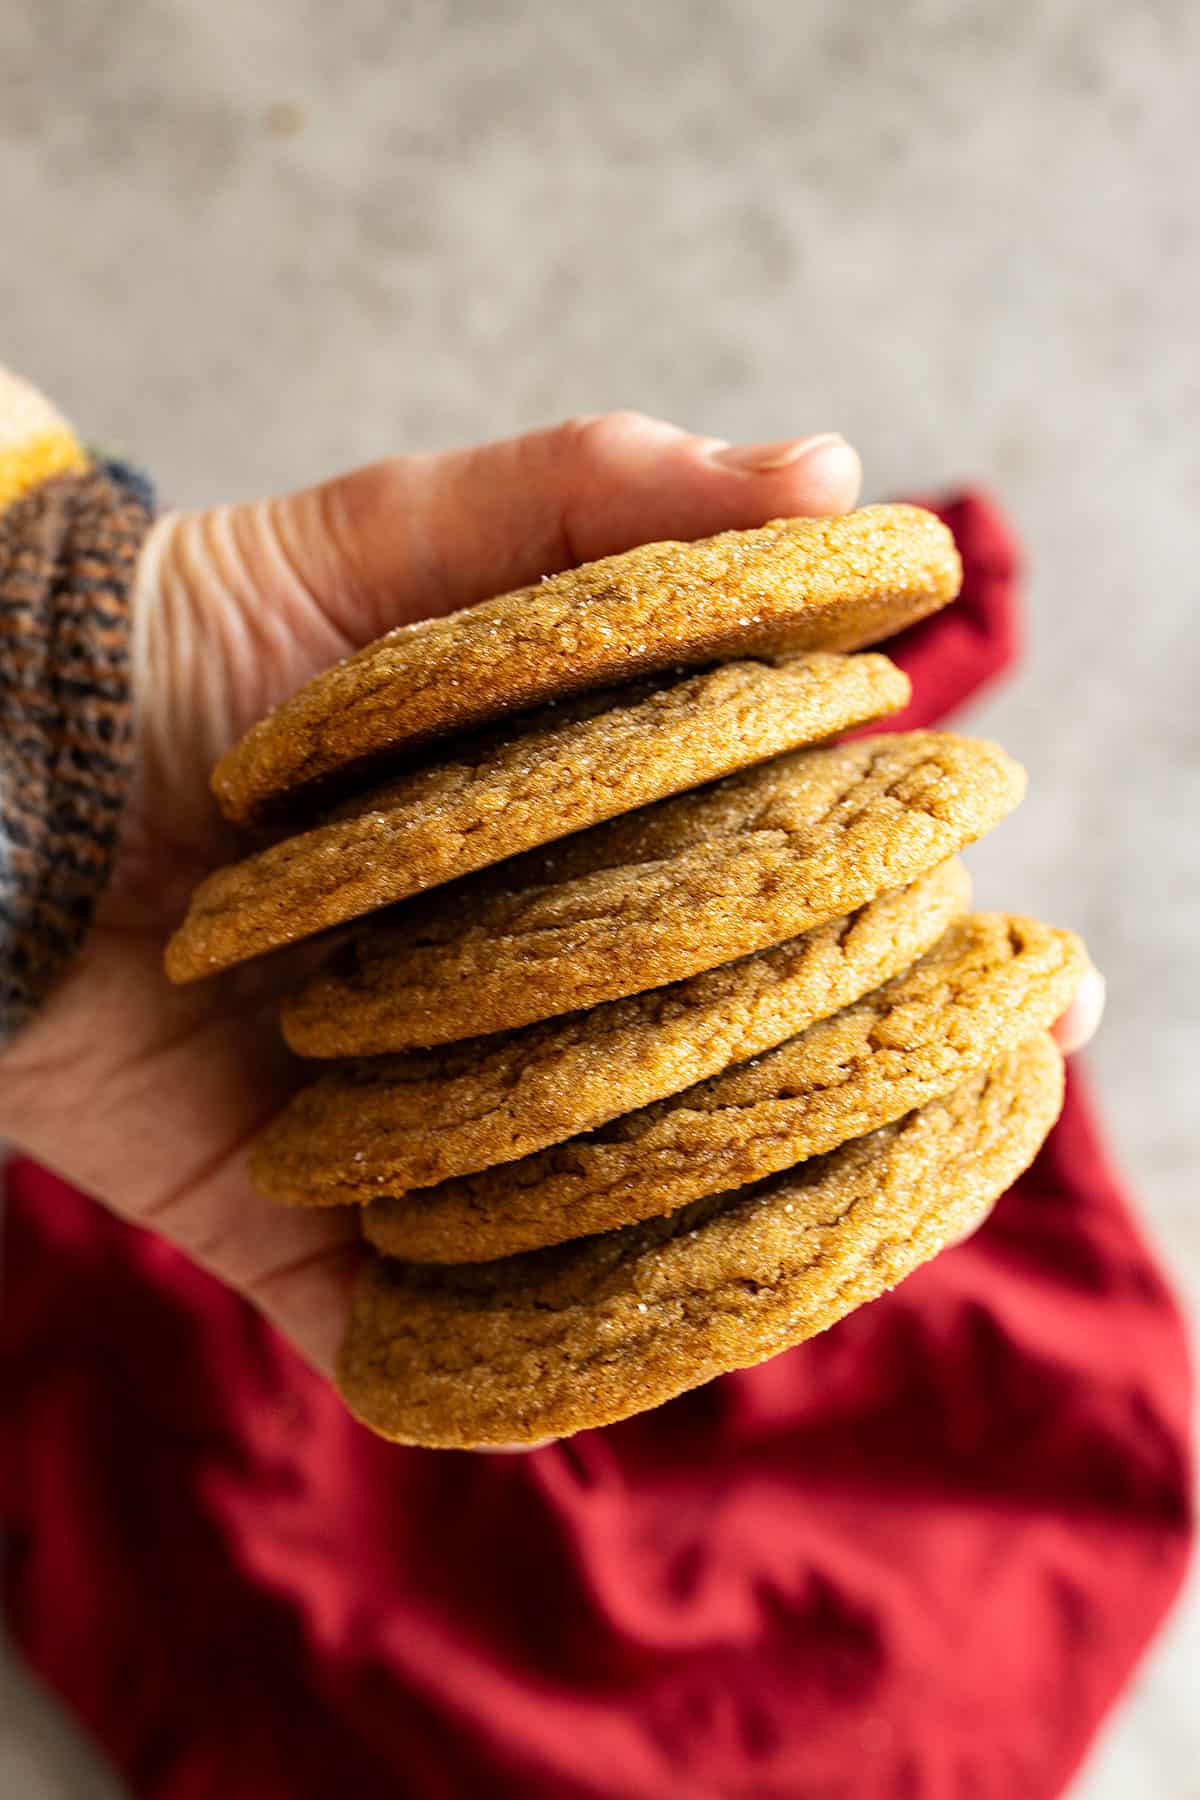 A hand holding a stack of cookies.